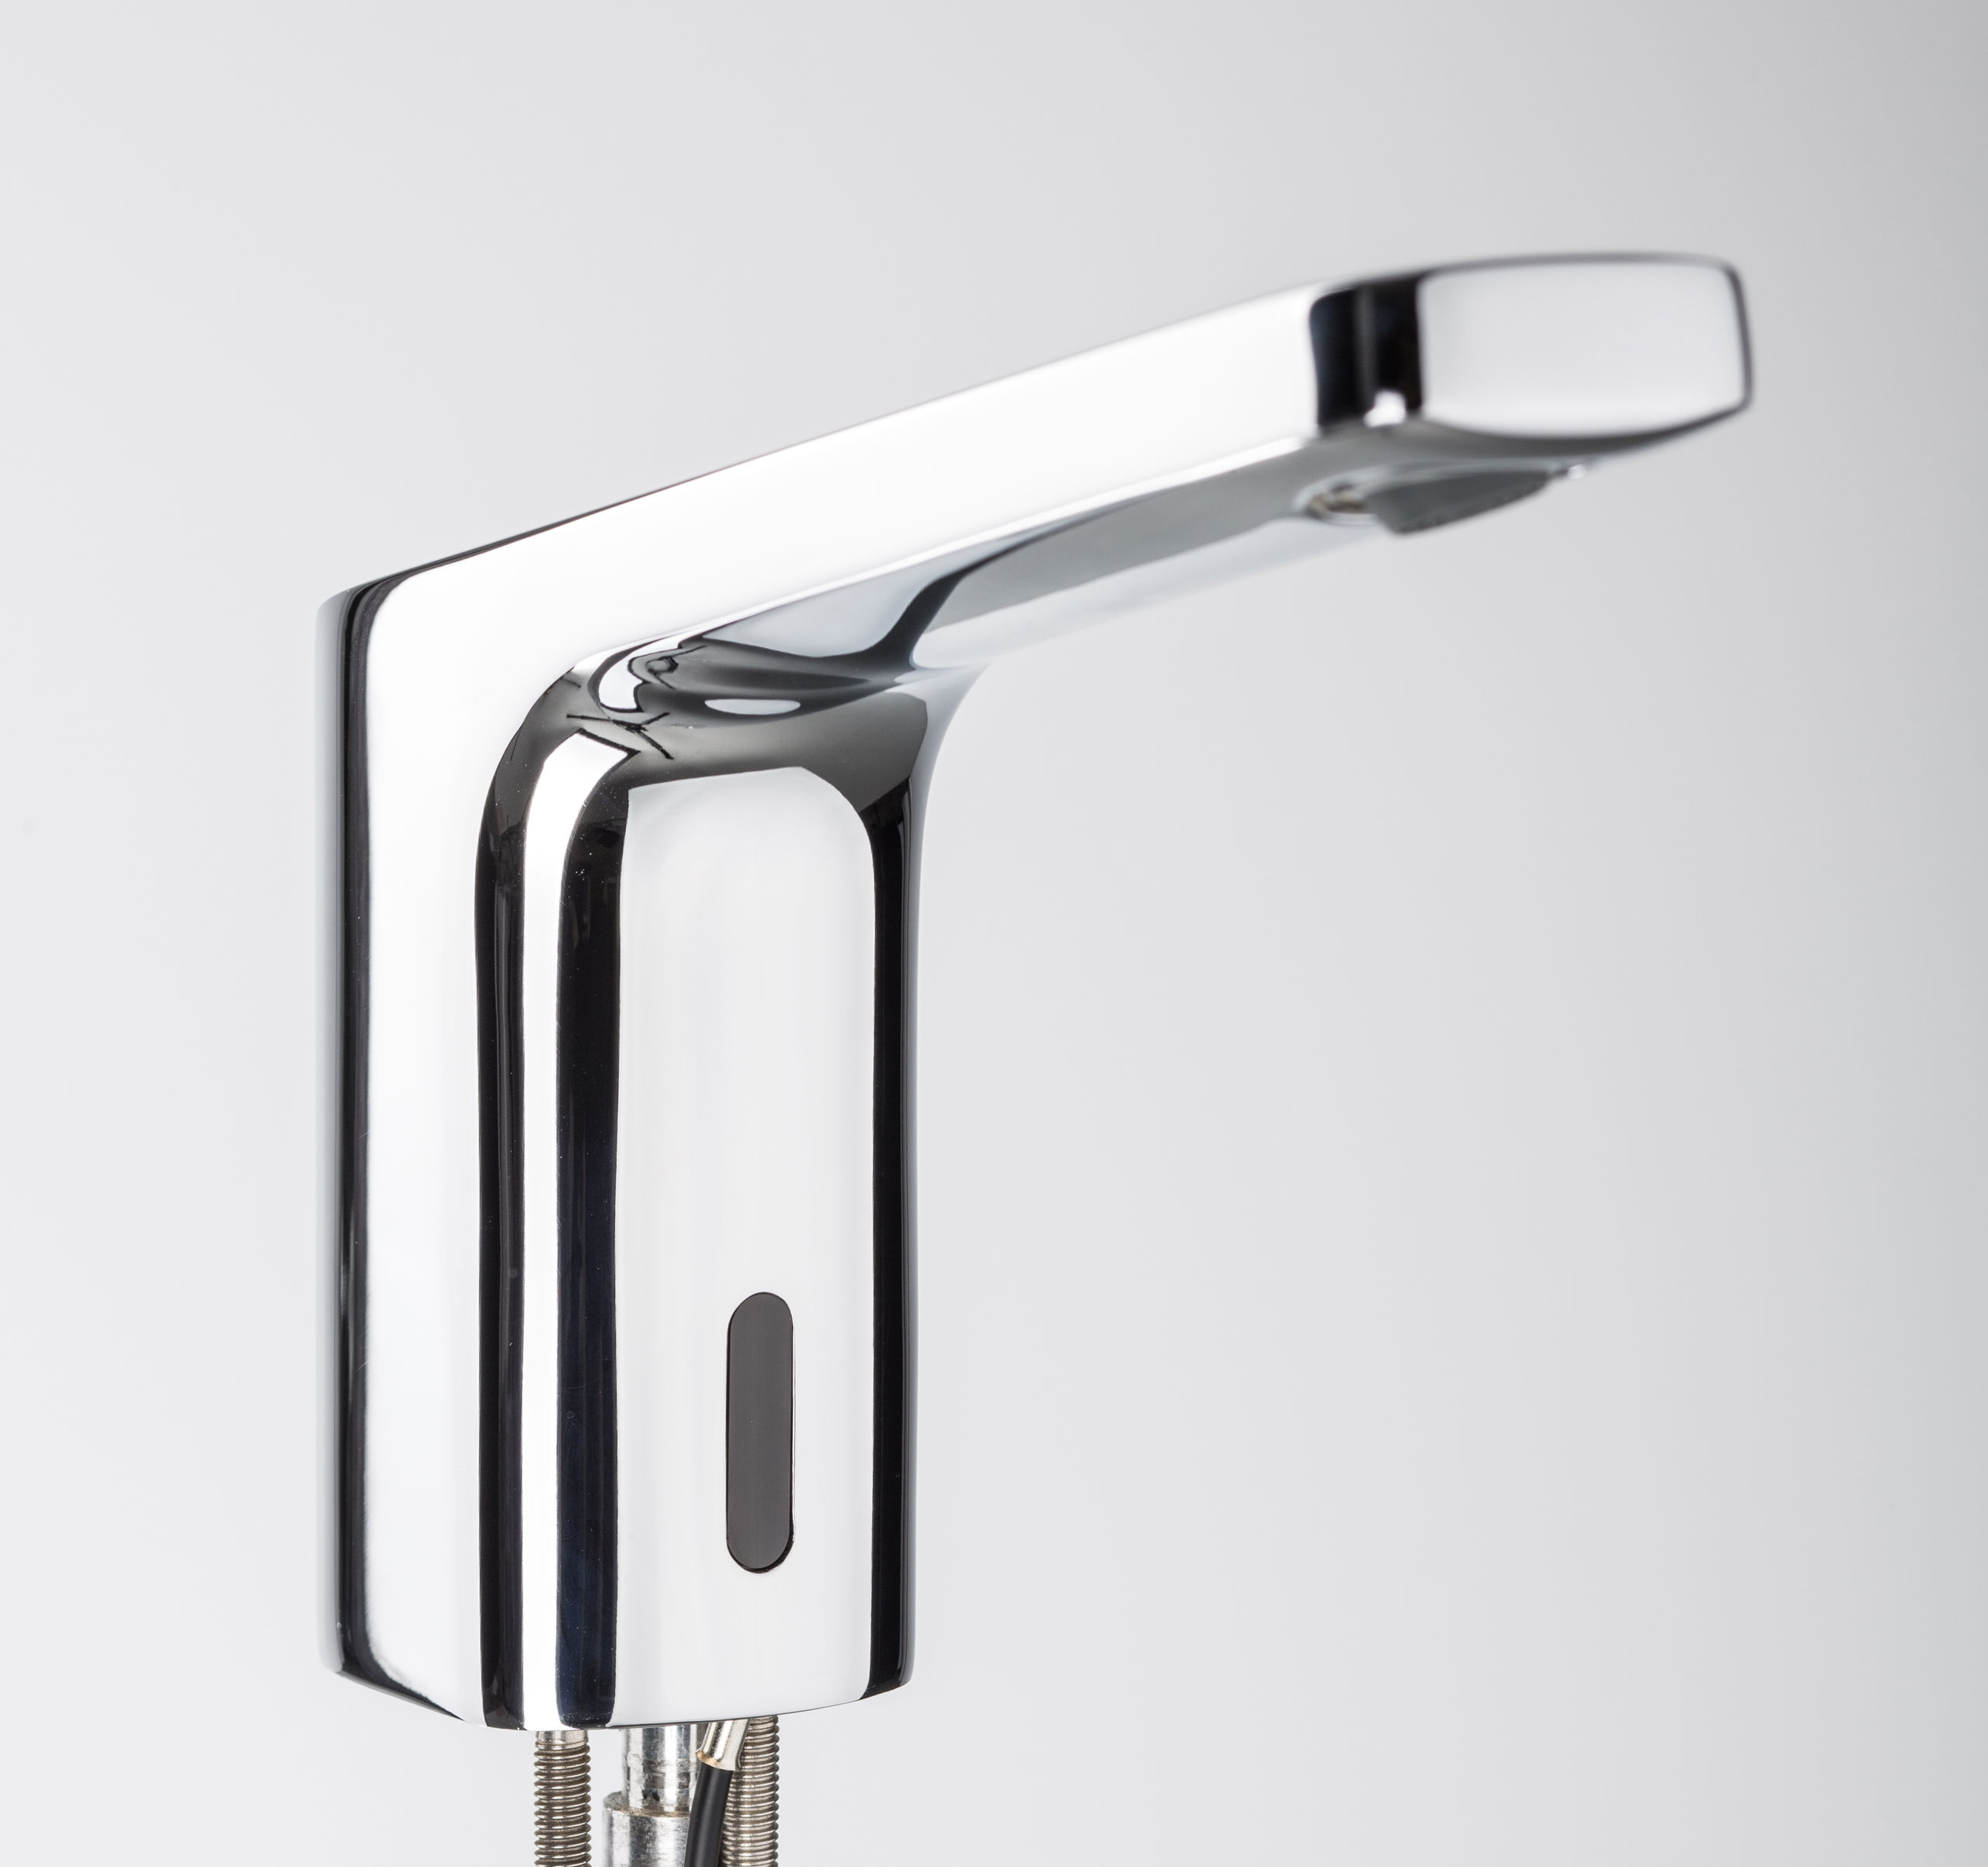 Active Infrared faucet